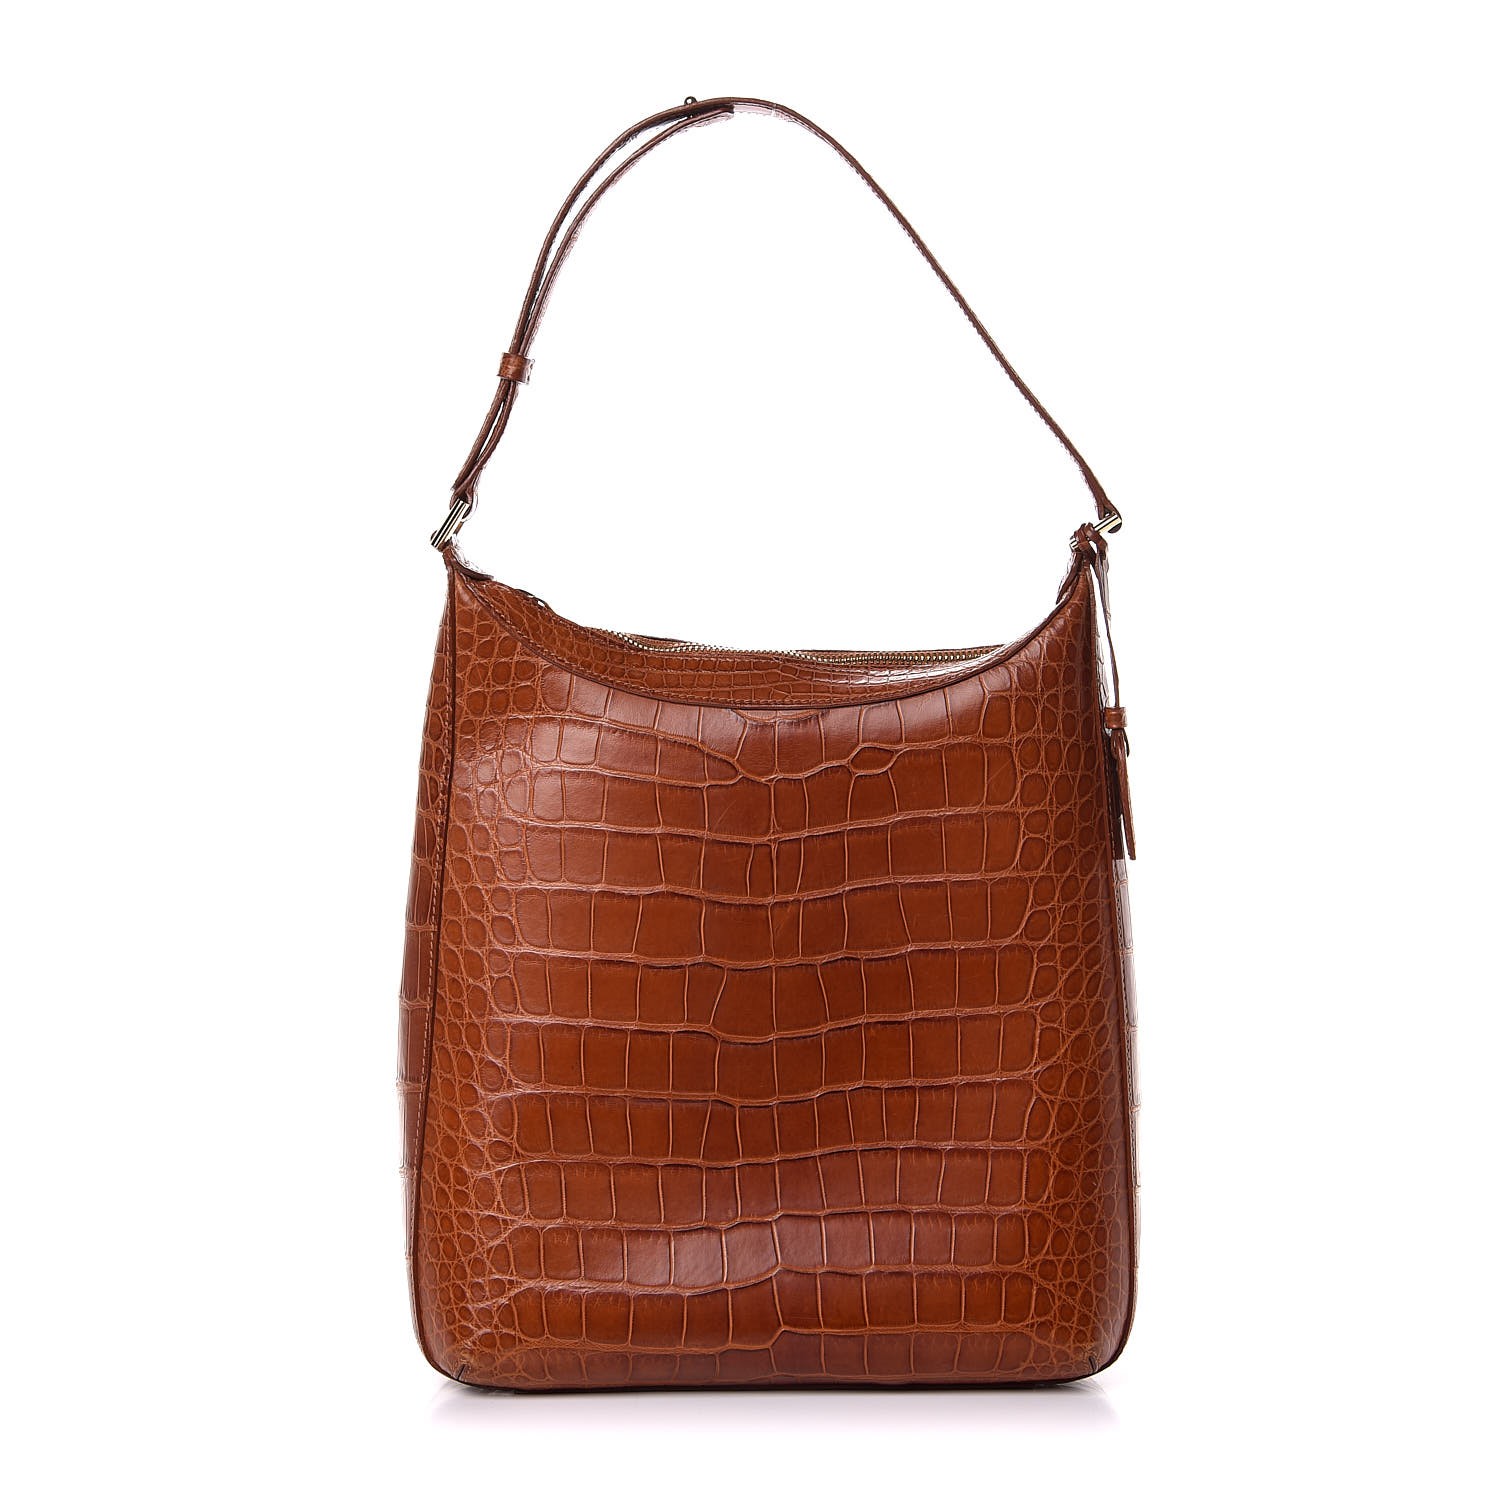 Top 10 most expensive Louis Vuitton bags in the world; Crocodile Lady bag  to Croc leather & more